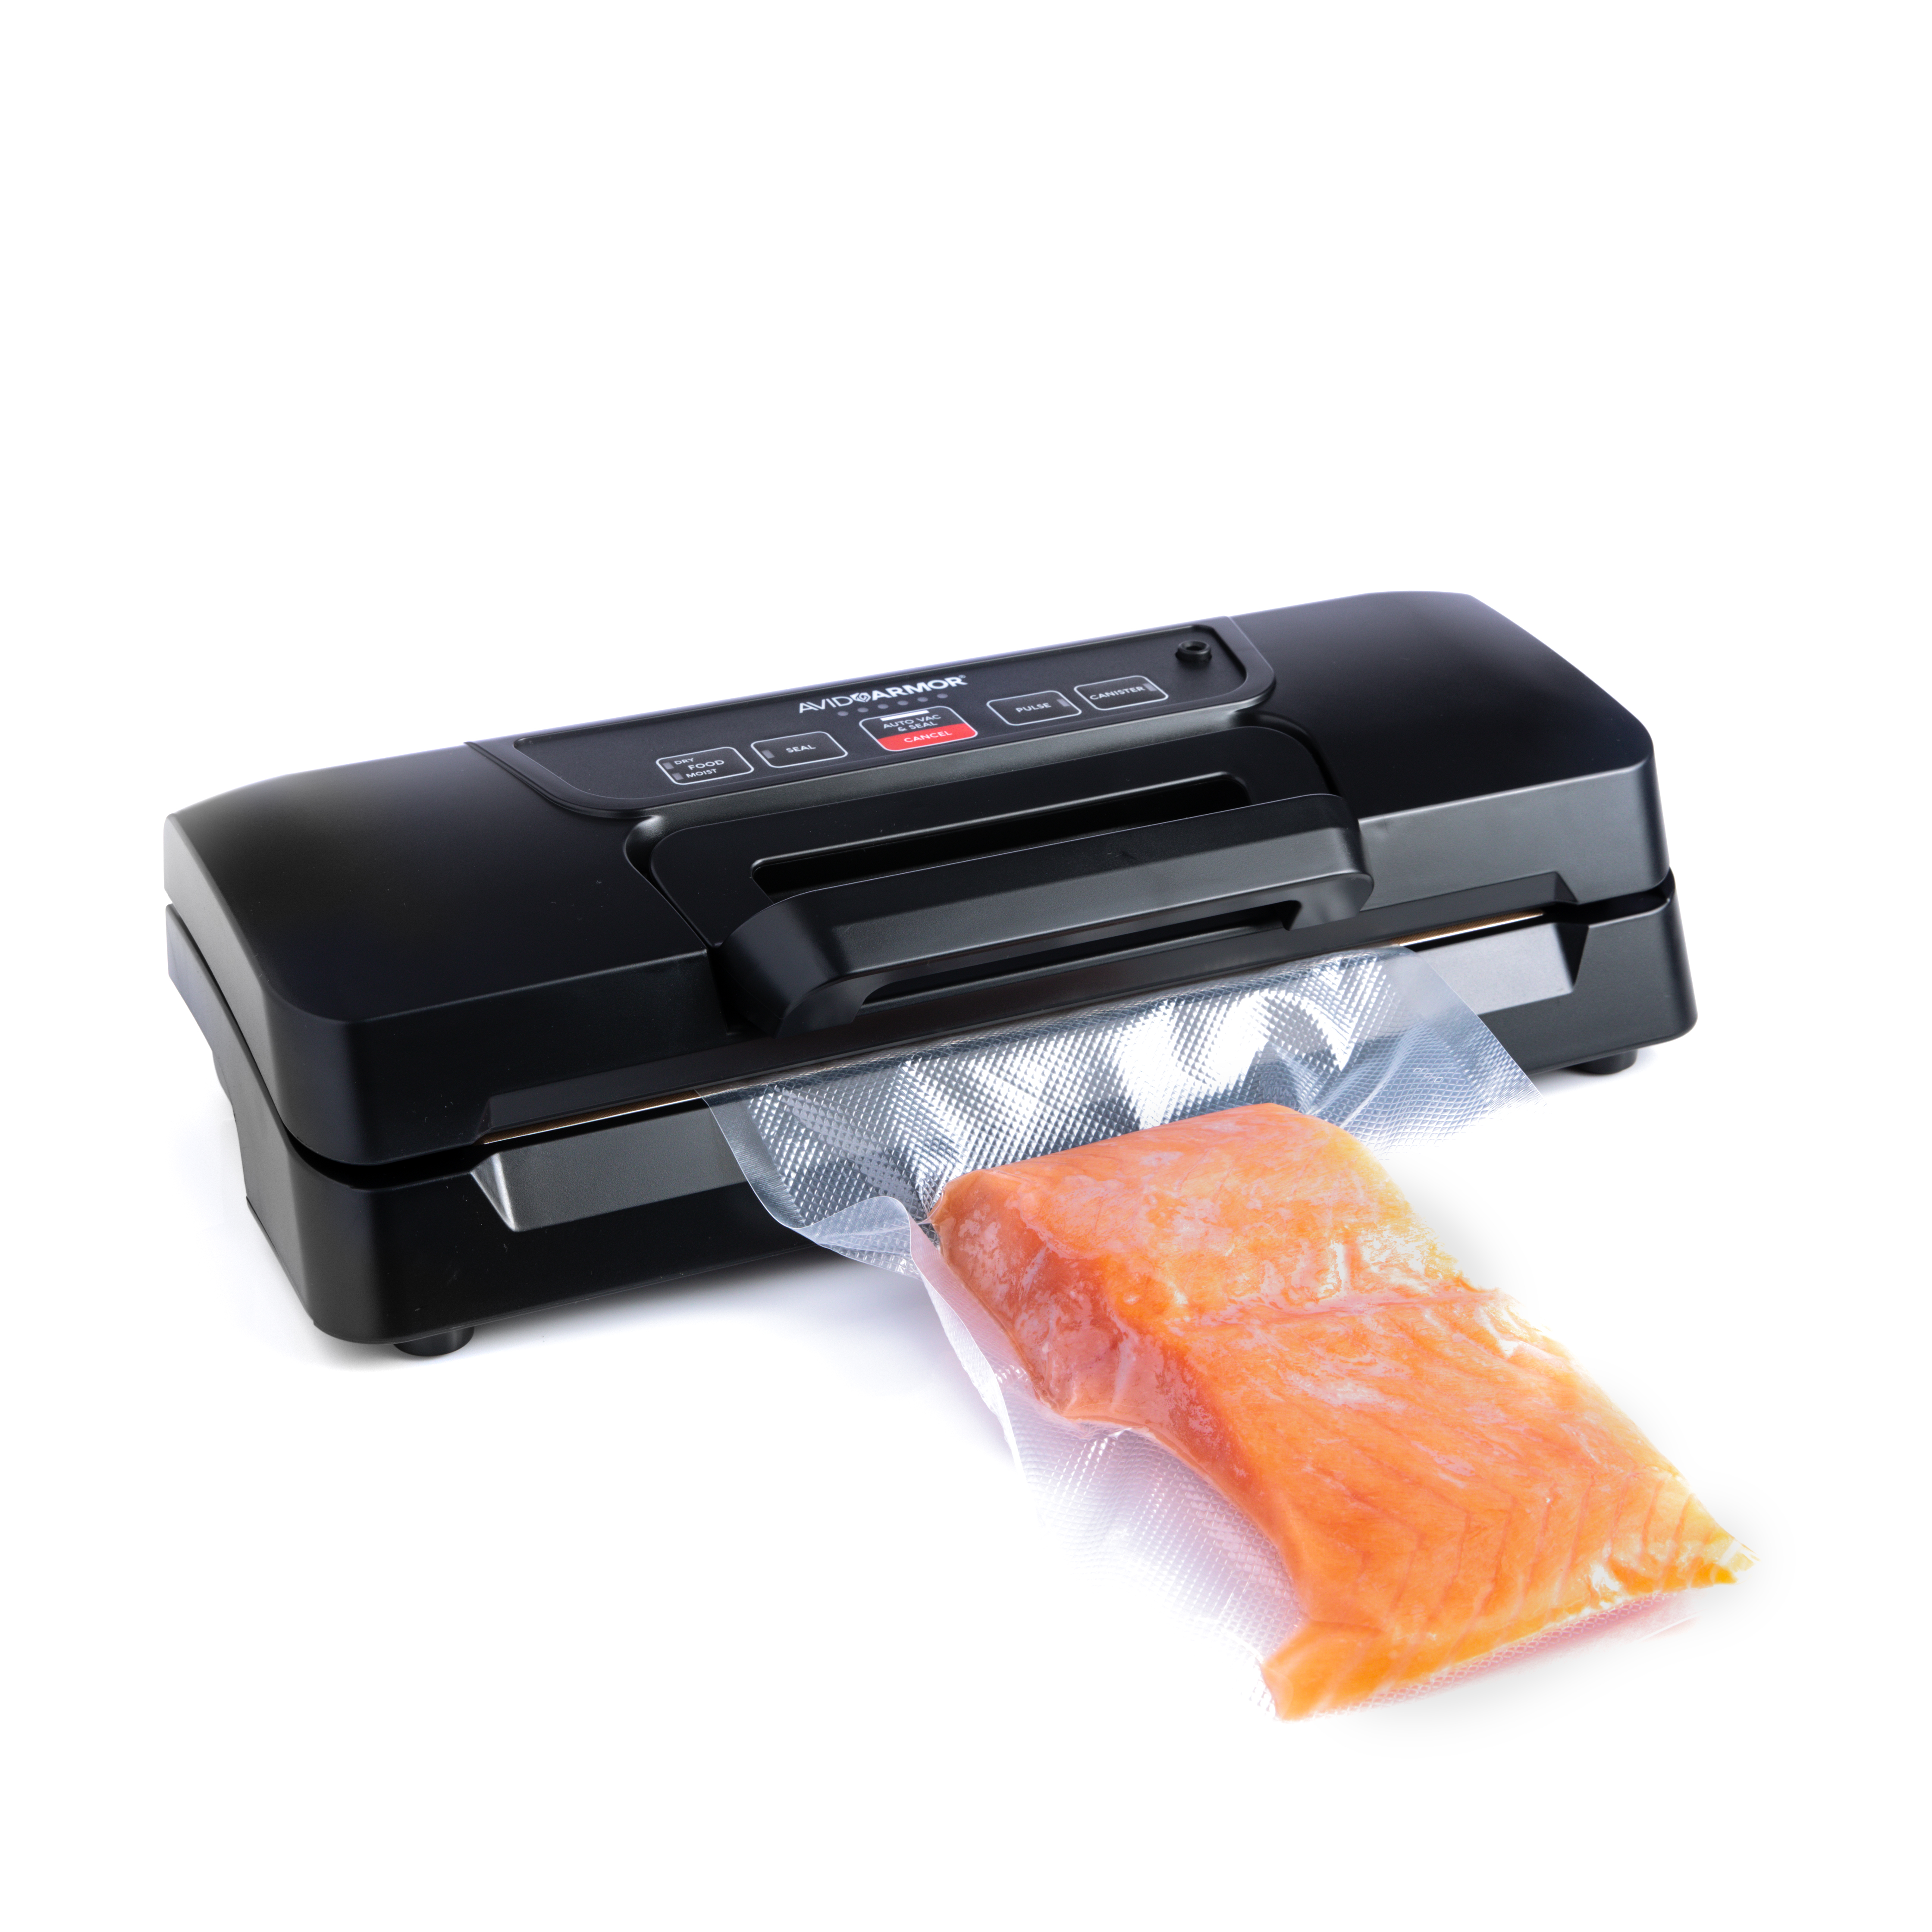 Avid Armor A100 Vacuum Sealer - Heavy-Duty Commercial Style Food Sealer for  Home Use